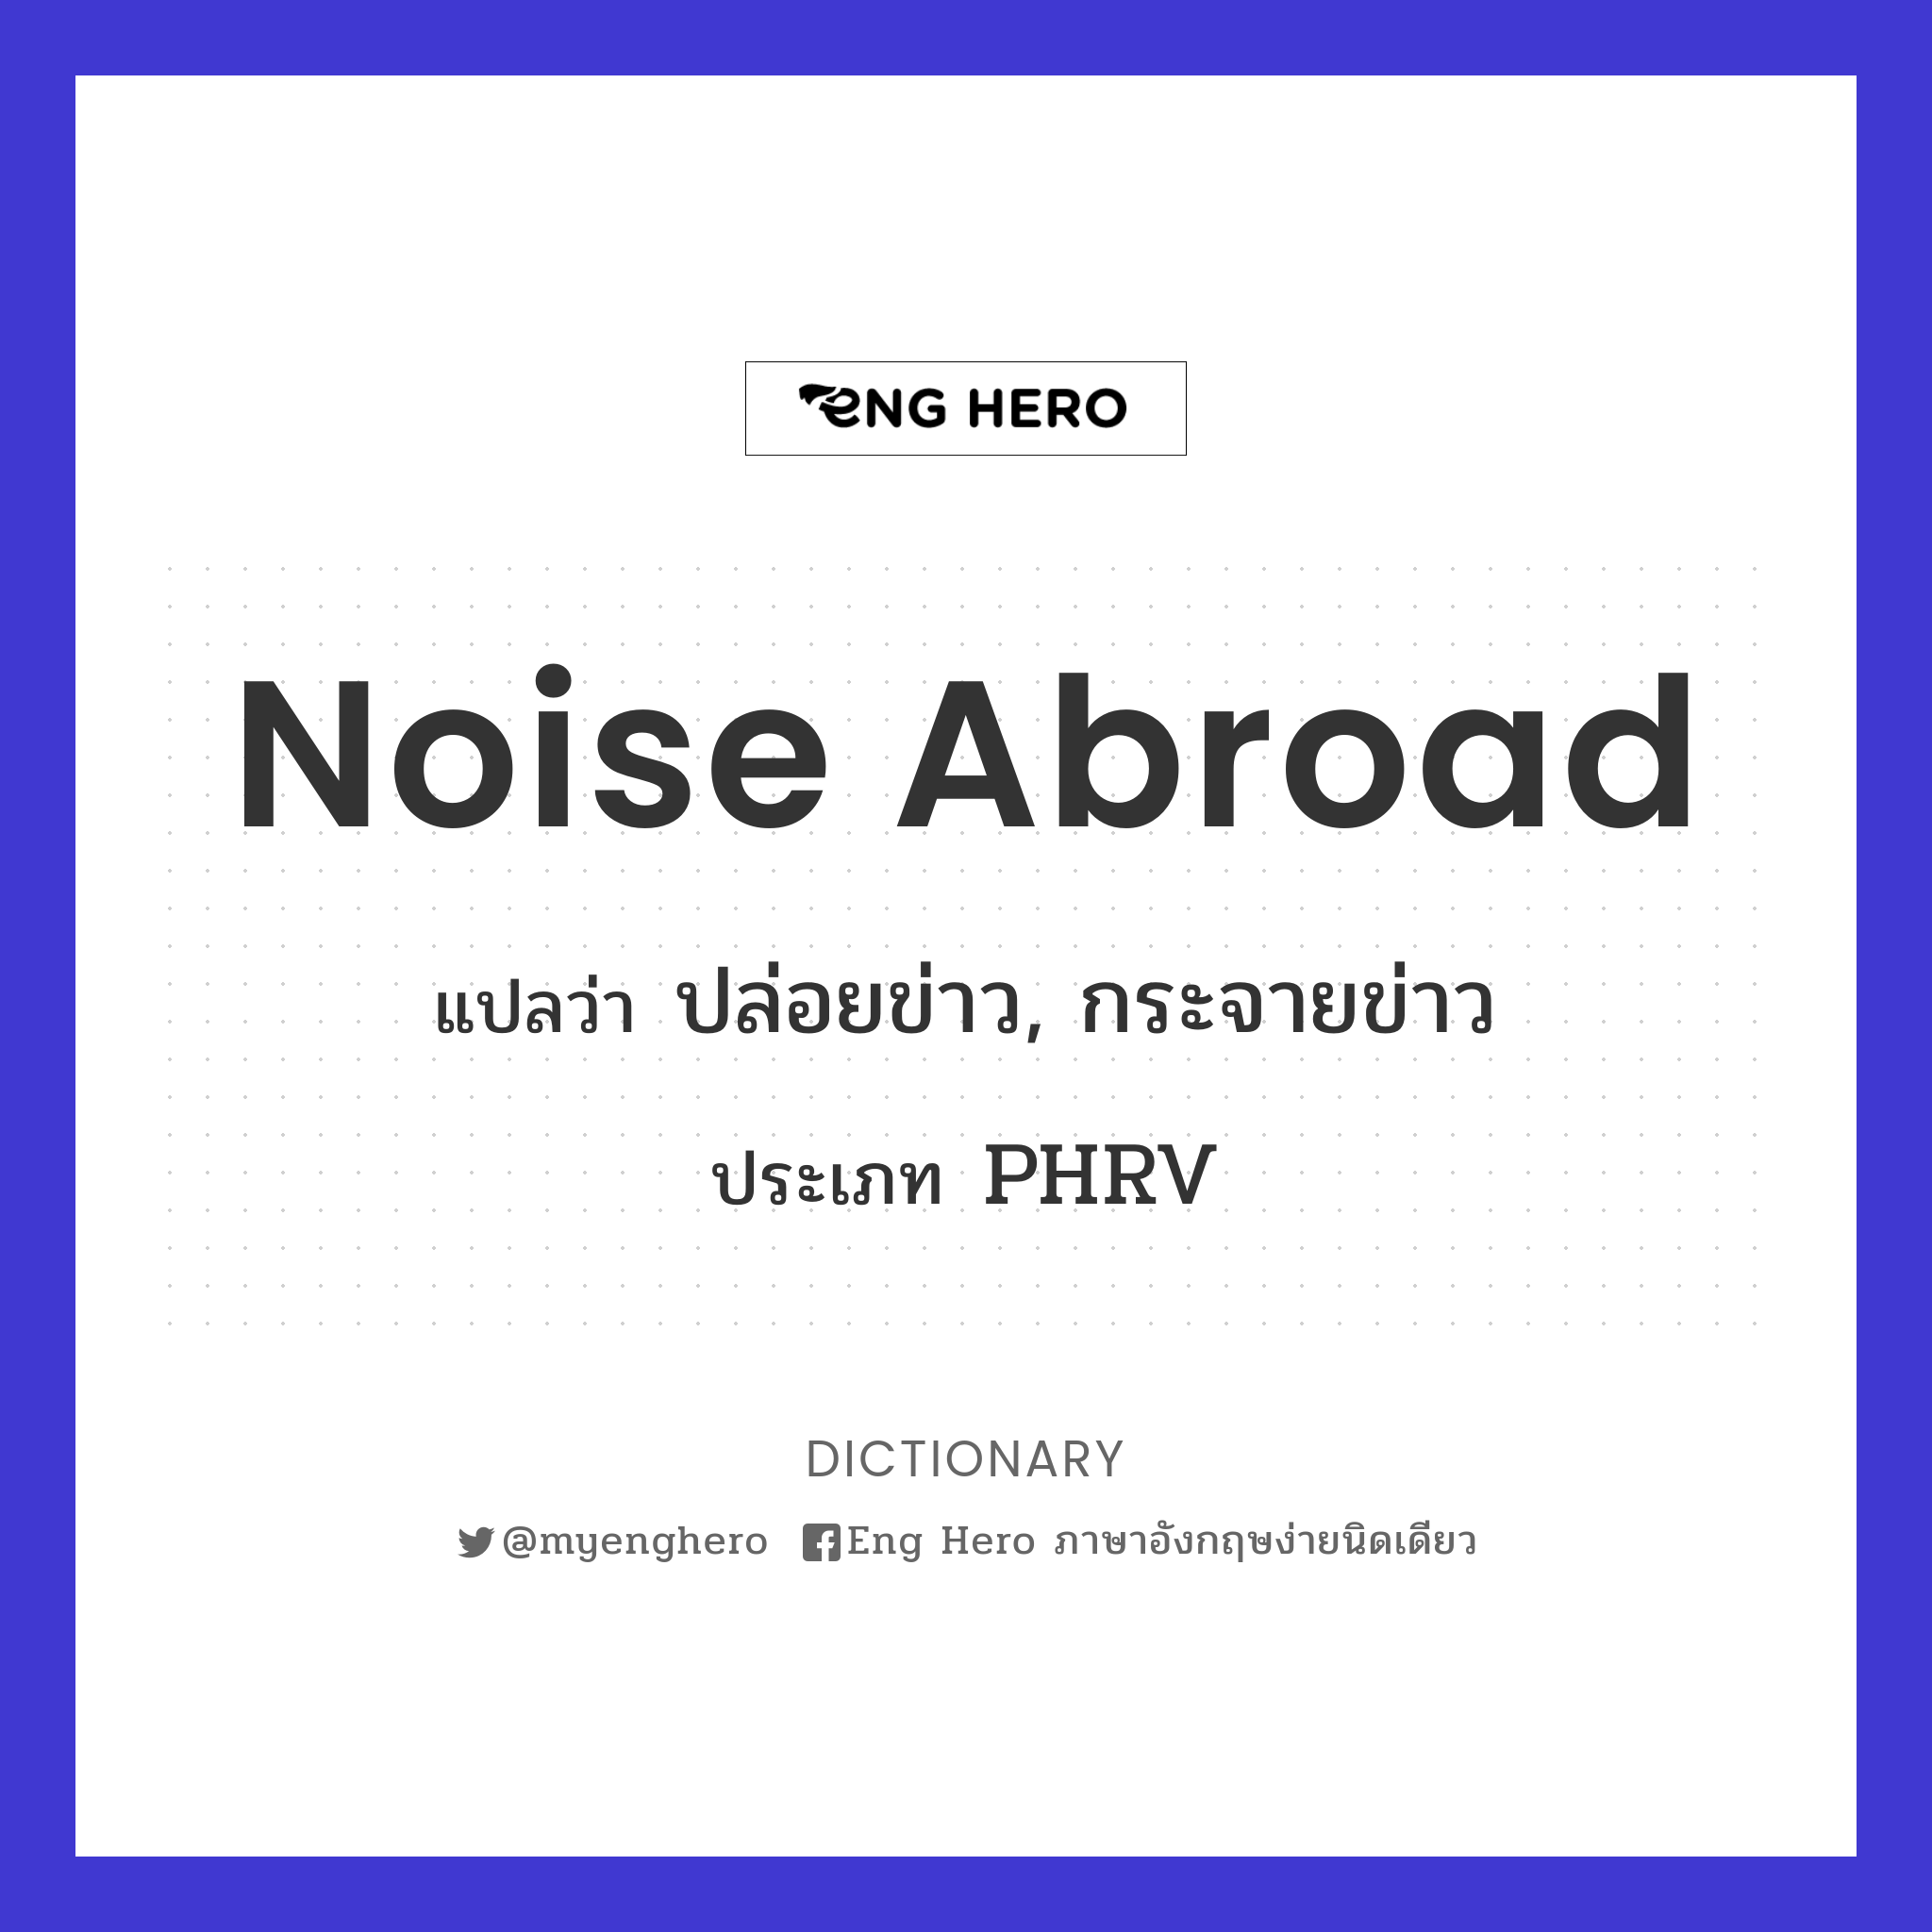 noise abroad